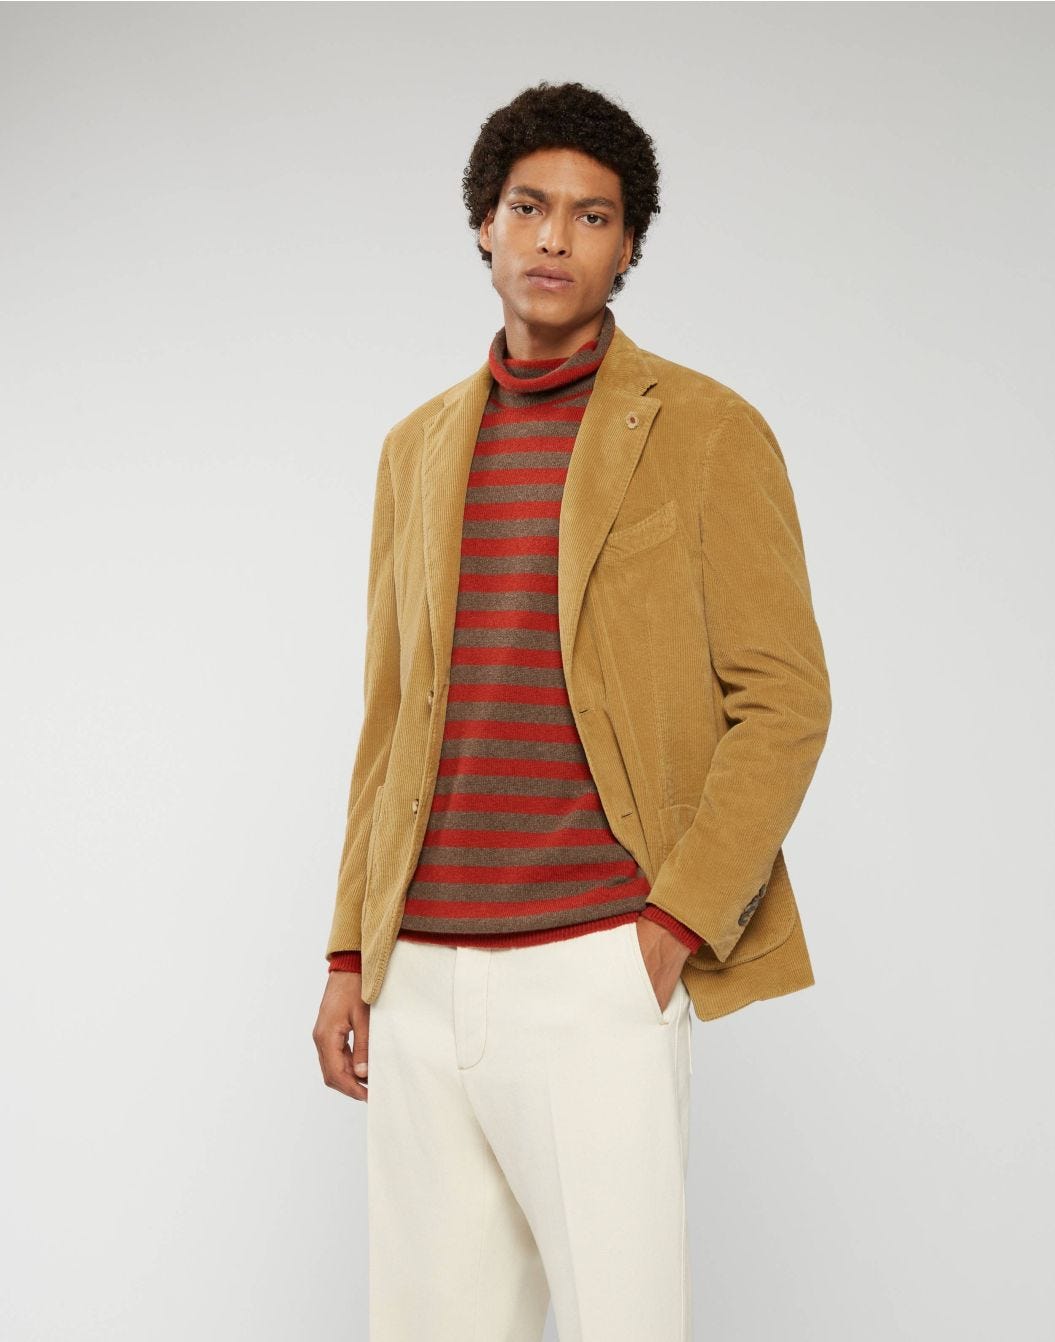 Jacket in camel-brown corduroy - Supersoft